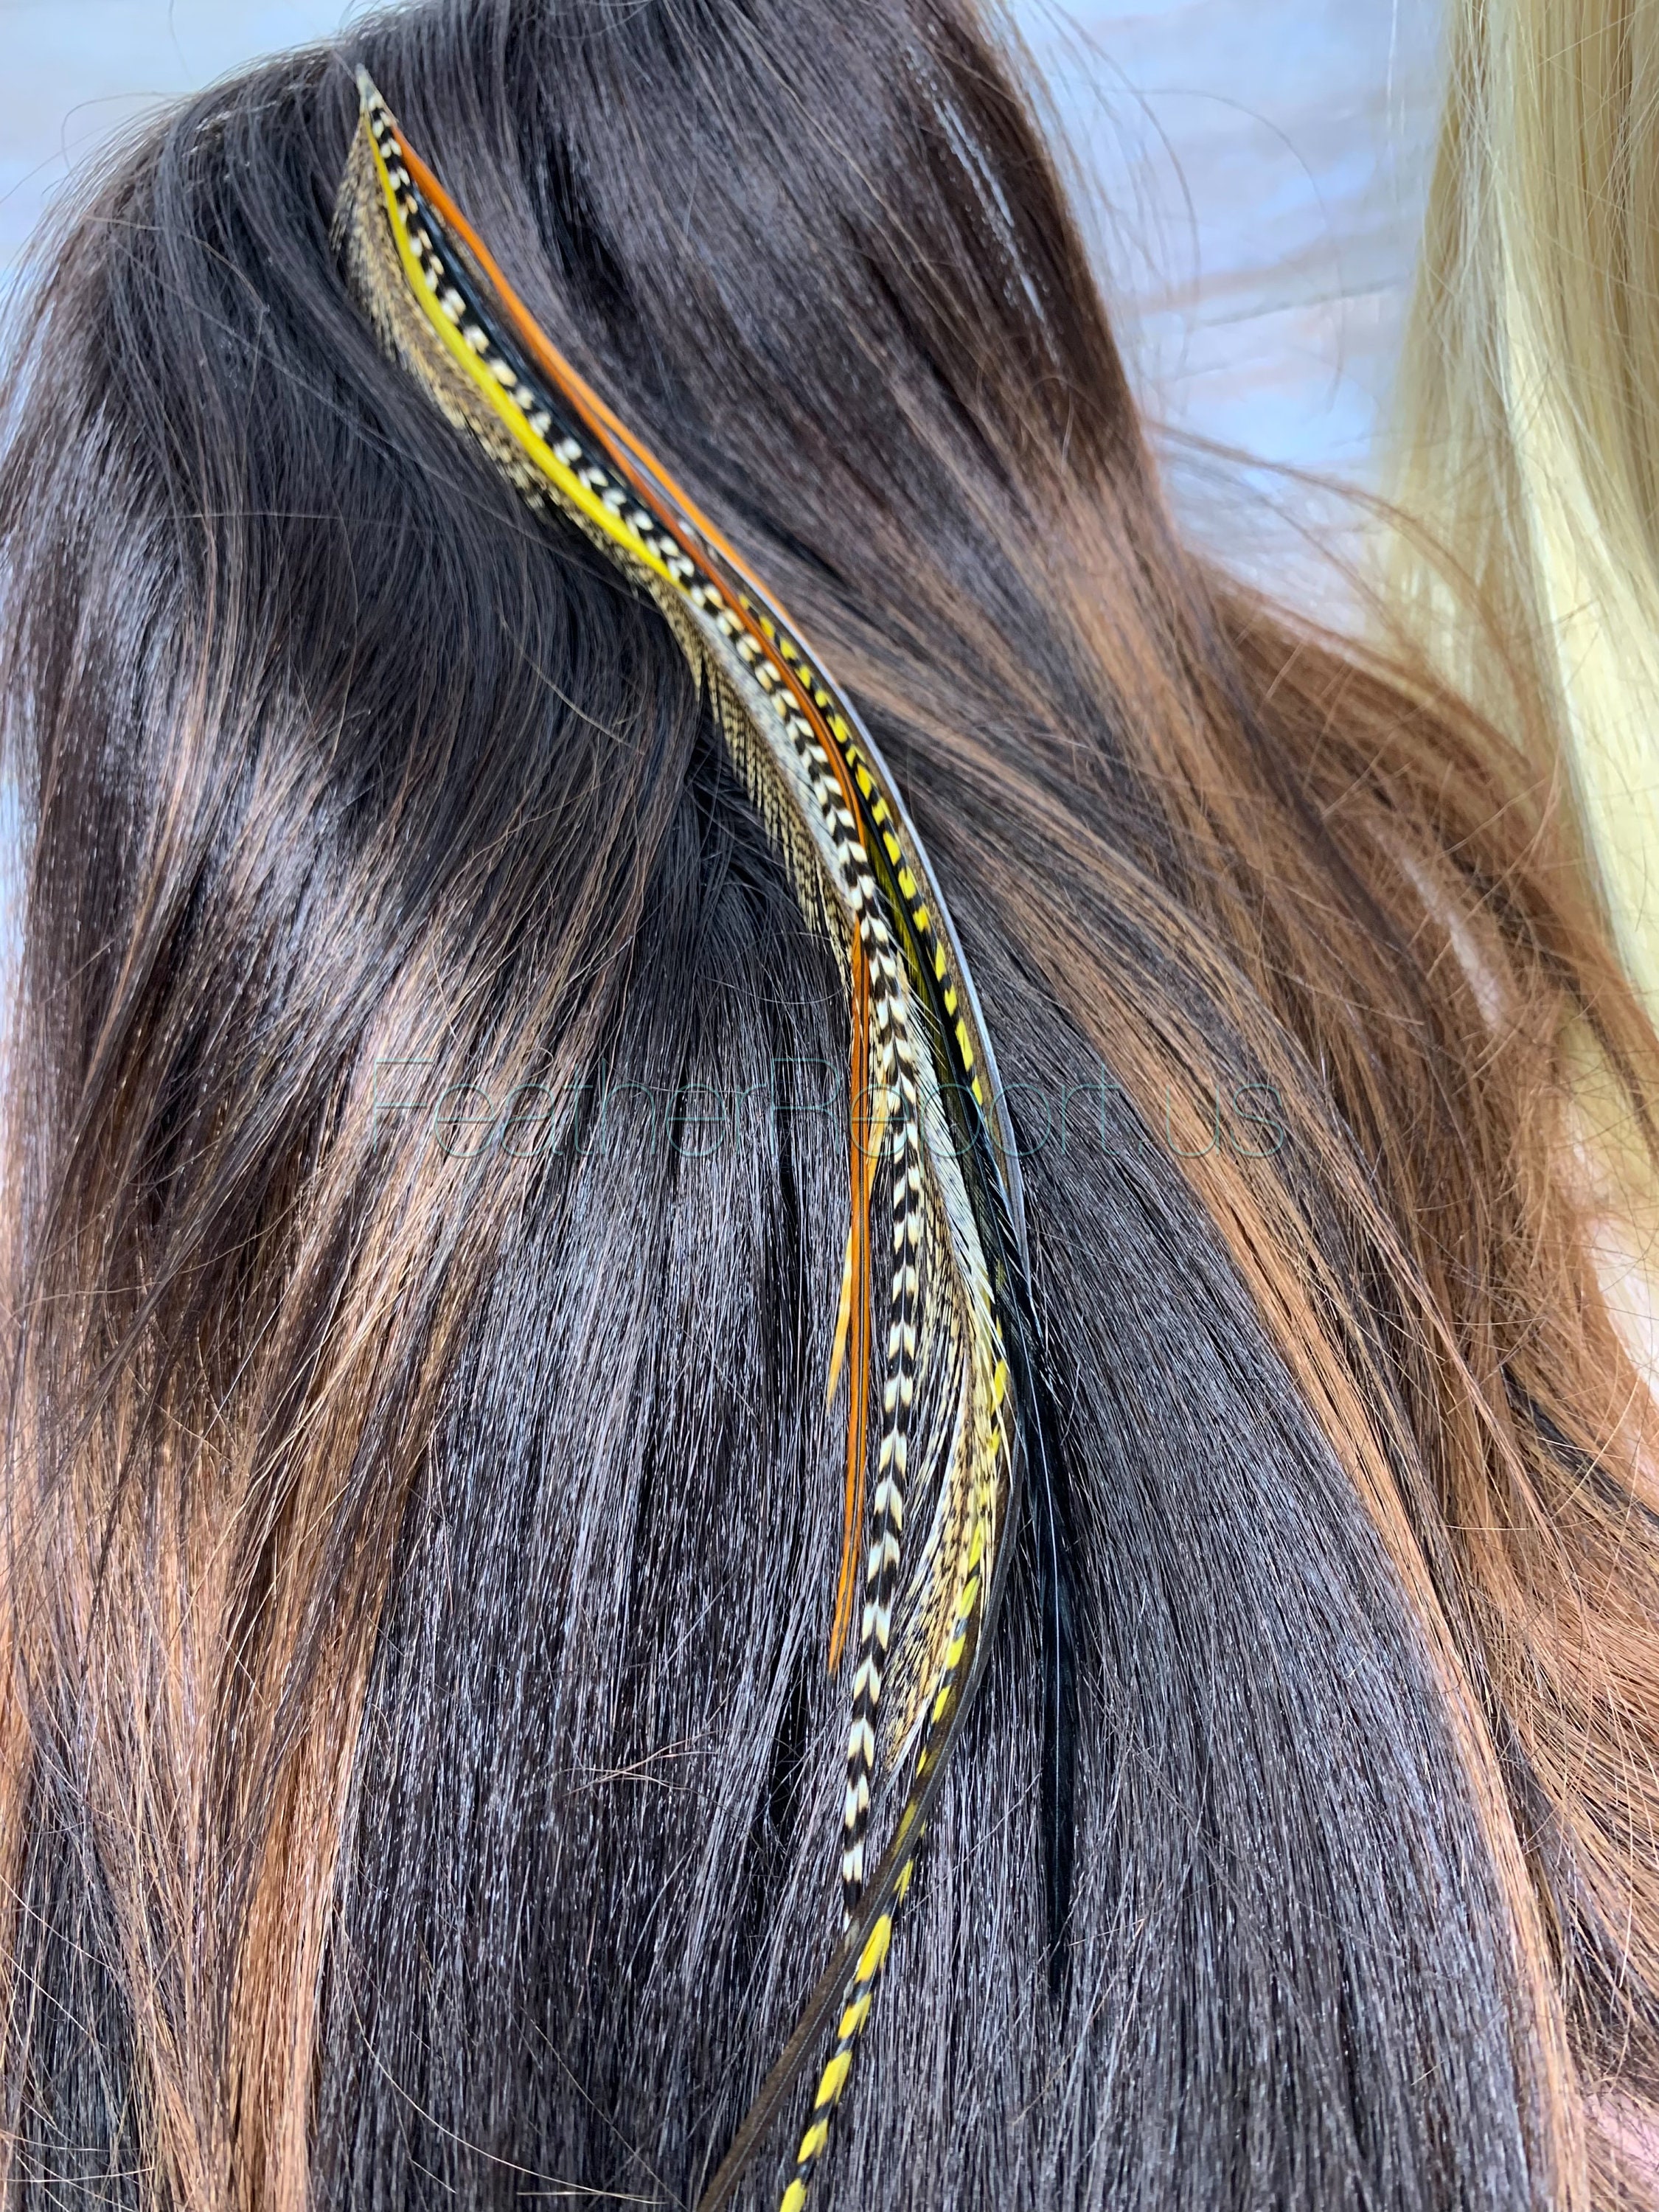 Rainbow Hair Extension Feathers Colorful Bright Colored Feather